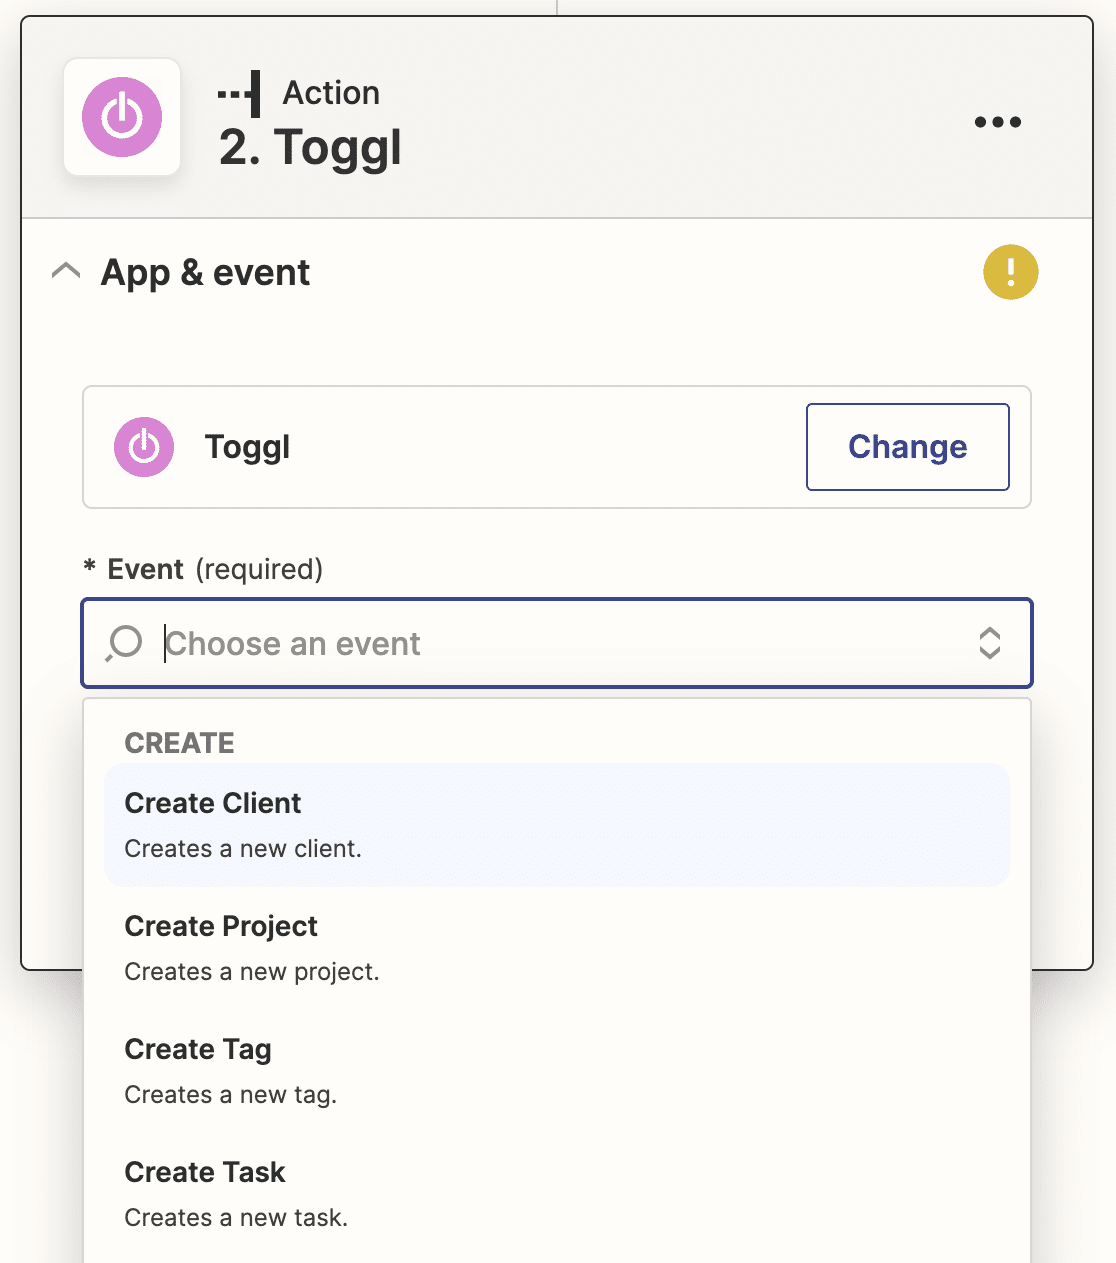 Choosing to create a new client in Toggl via Zapier